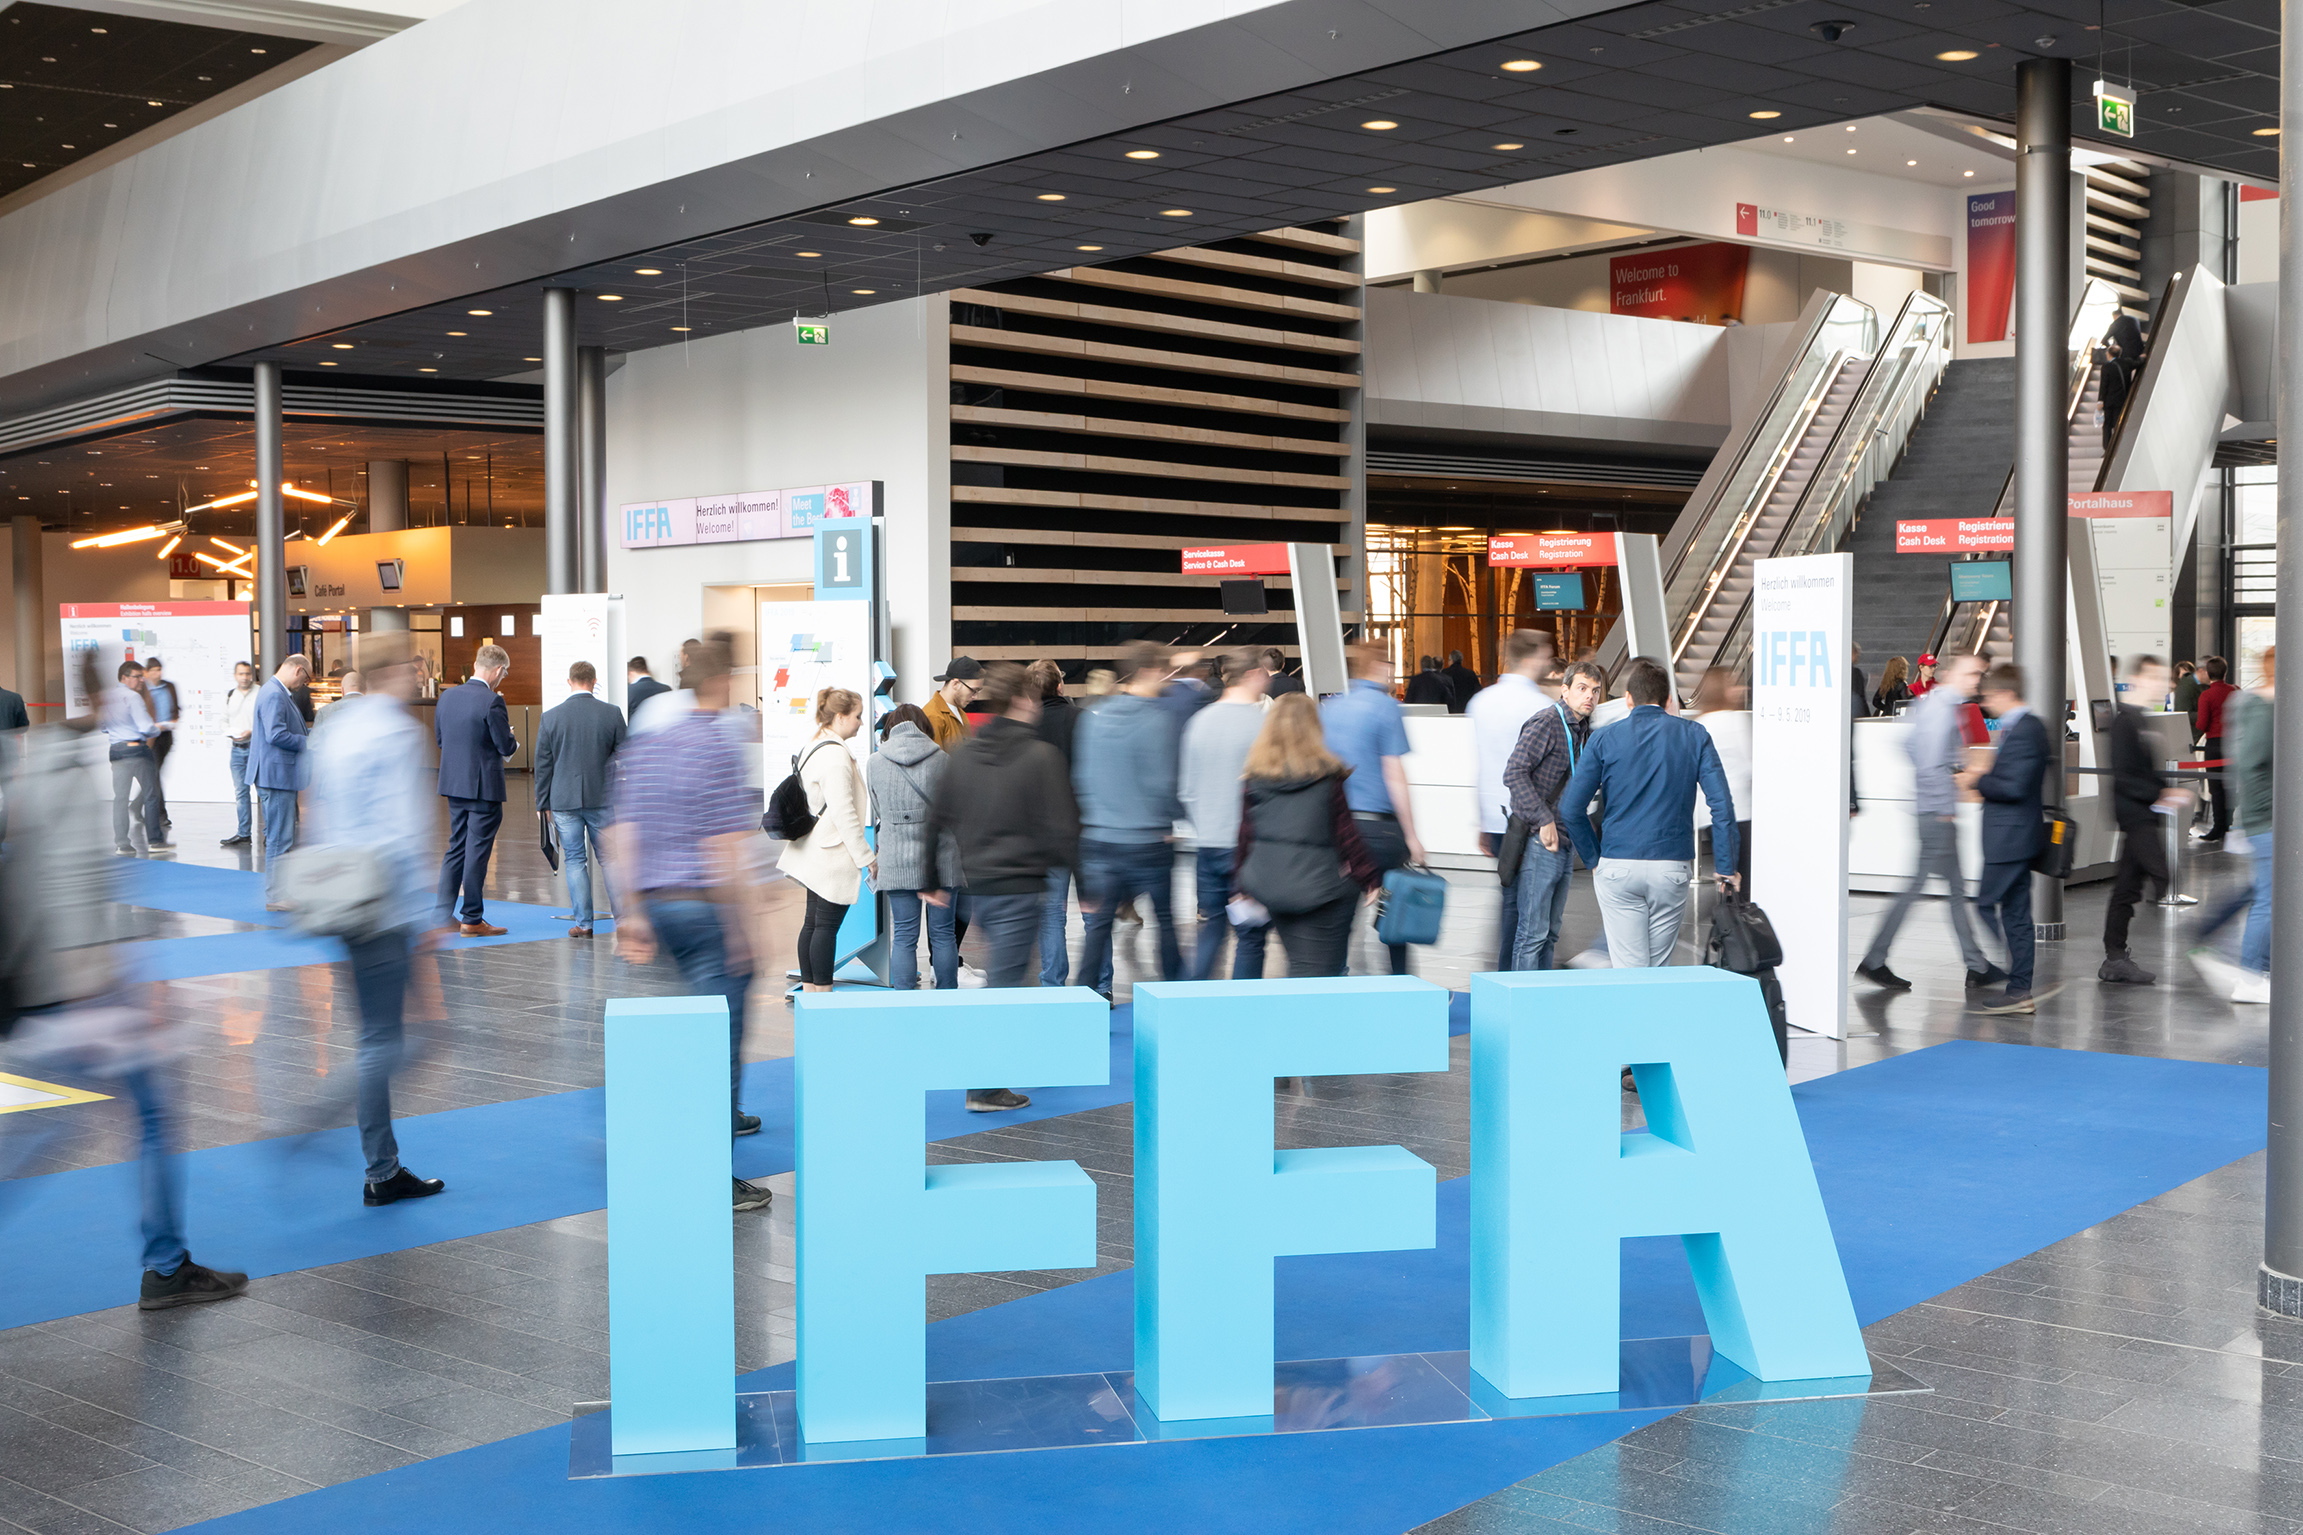 IFFA welcomes trade visitors from all over the world in Frankfurt am Main from May 14 to 19, 2022